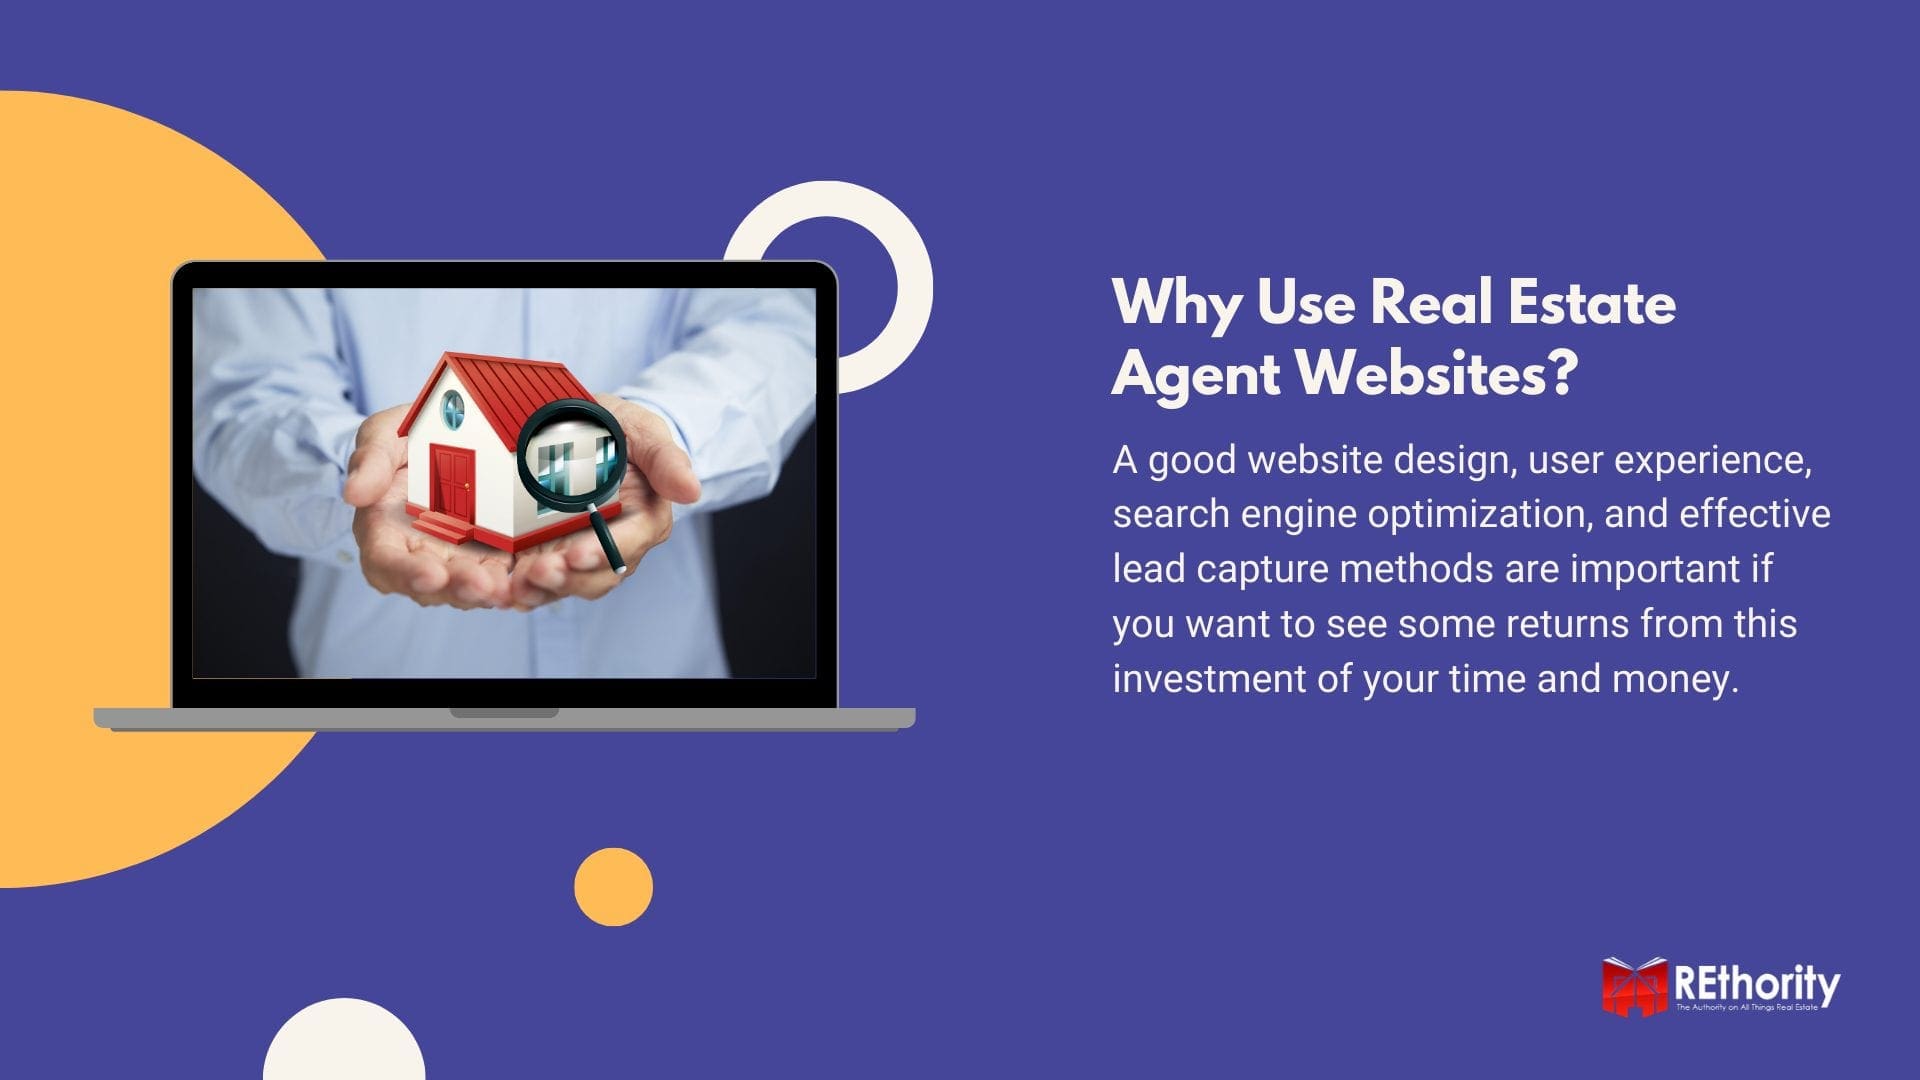 Why Use Real Estate Agent Websites graphic with REthority logo